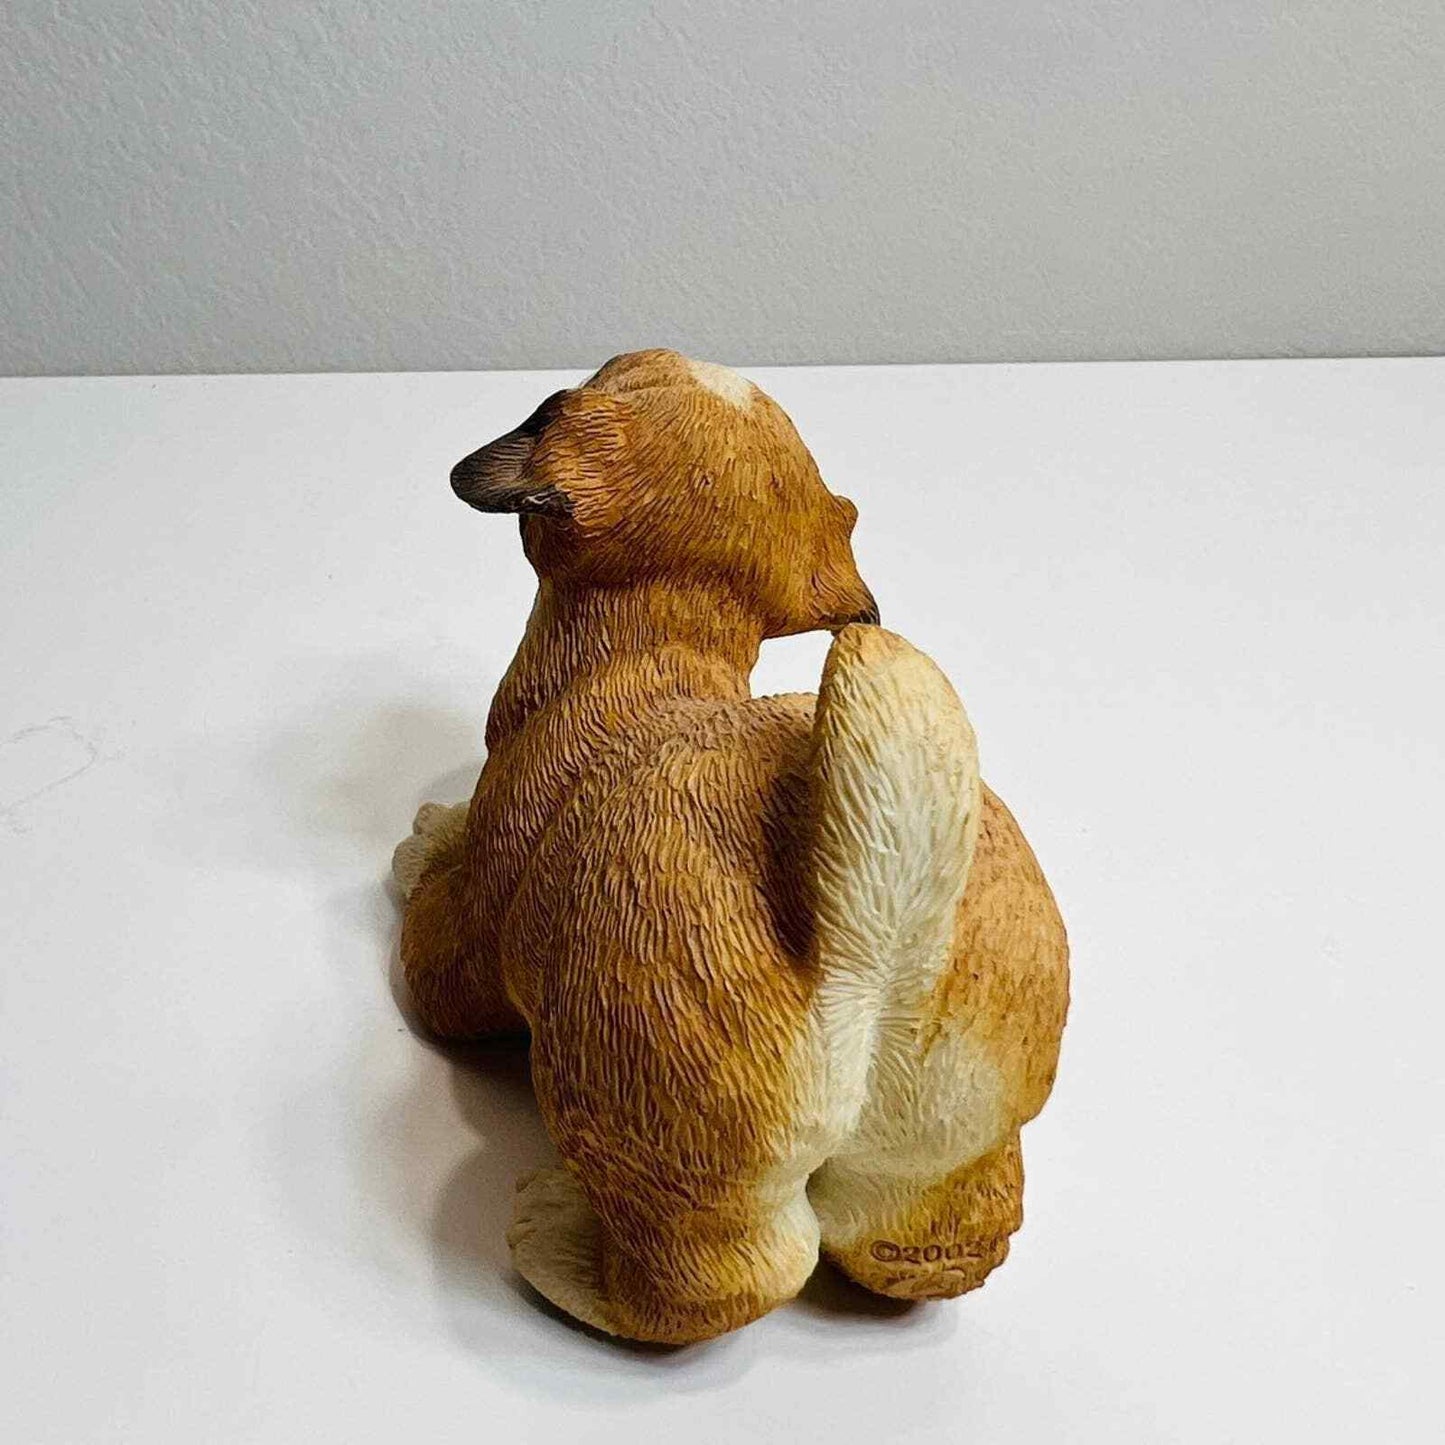 Bulldog Pup Dog Figurine Country Artists Hand Painted Home Decor